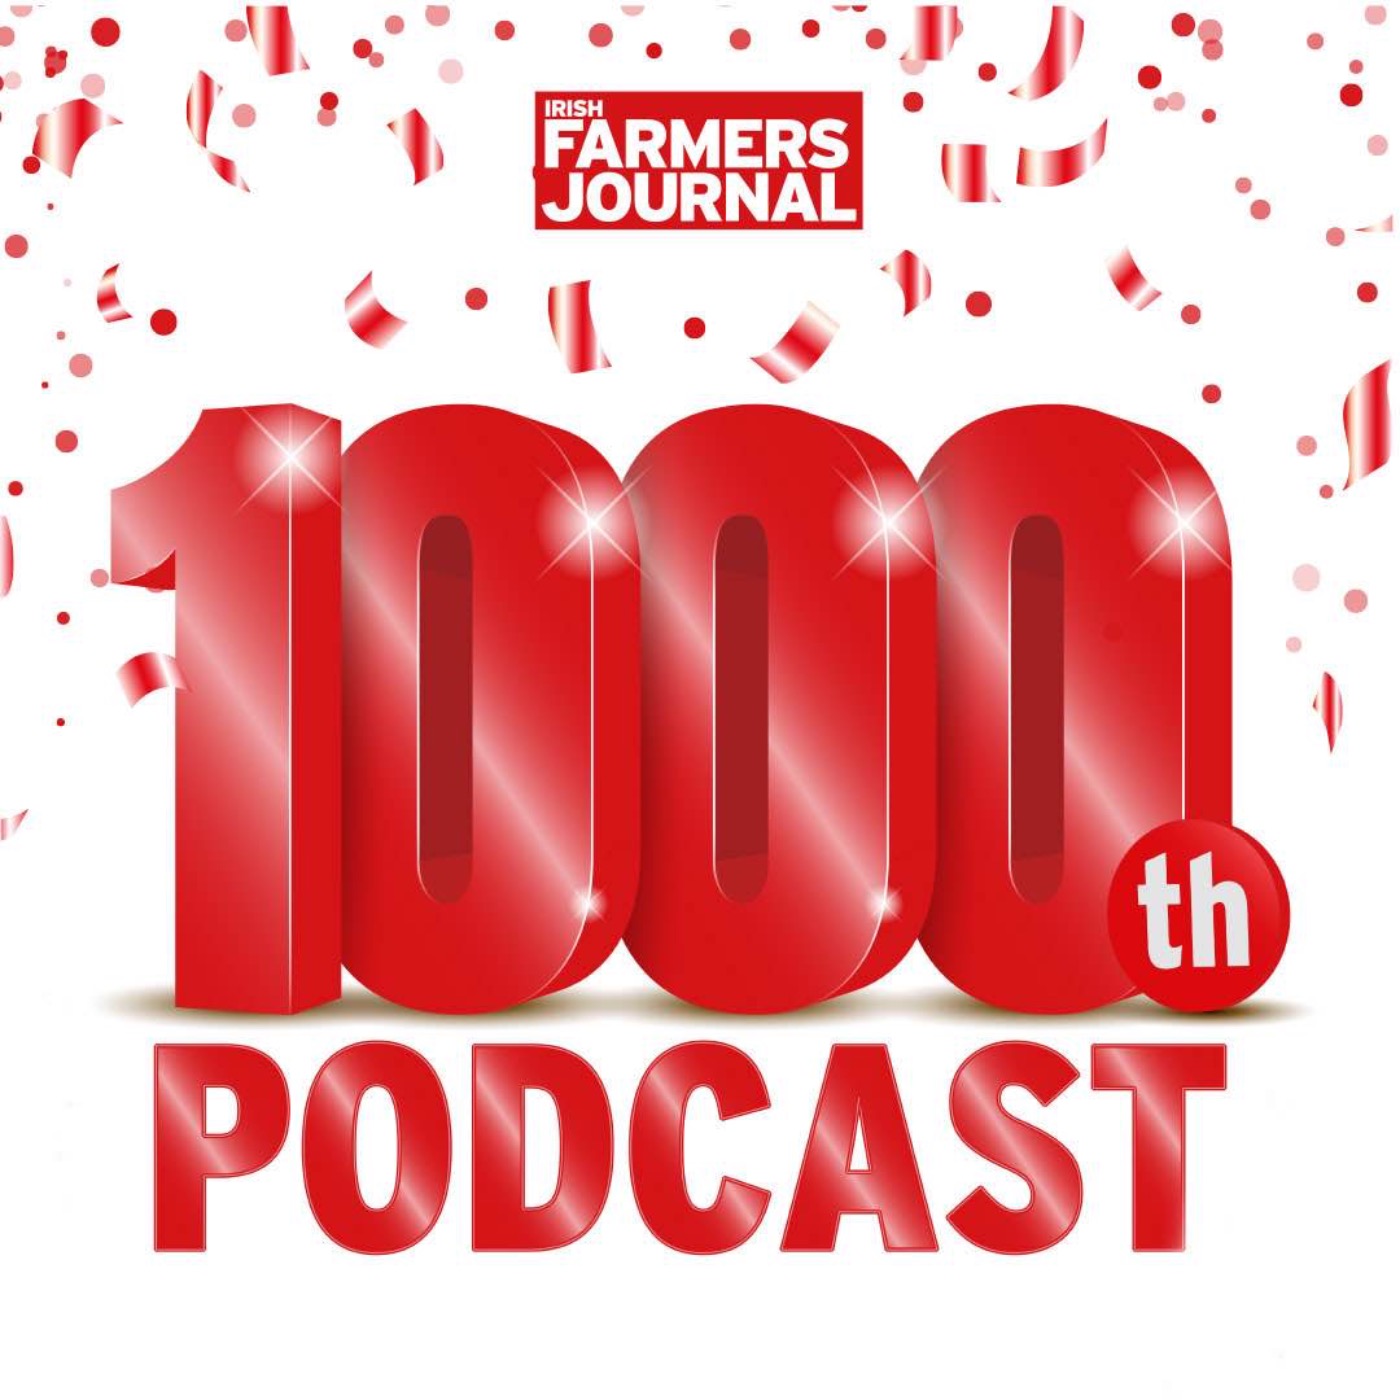 Ep 1000:  The Irish Farmers Journal team celebrates the milestone 1,000th podcast with lots of banter,  and a €1,000 cash giveaway